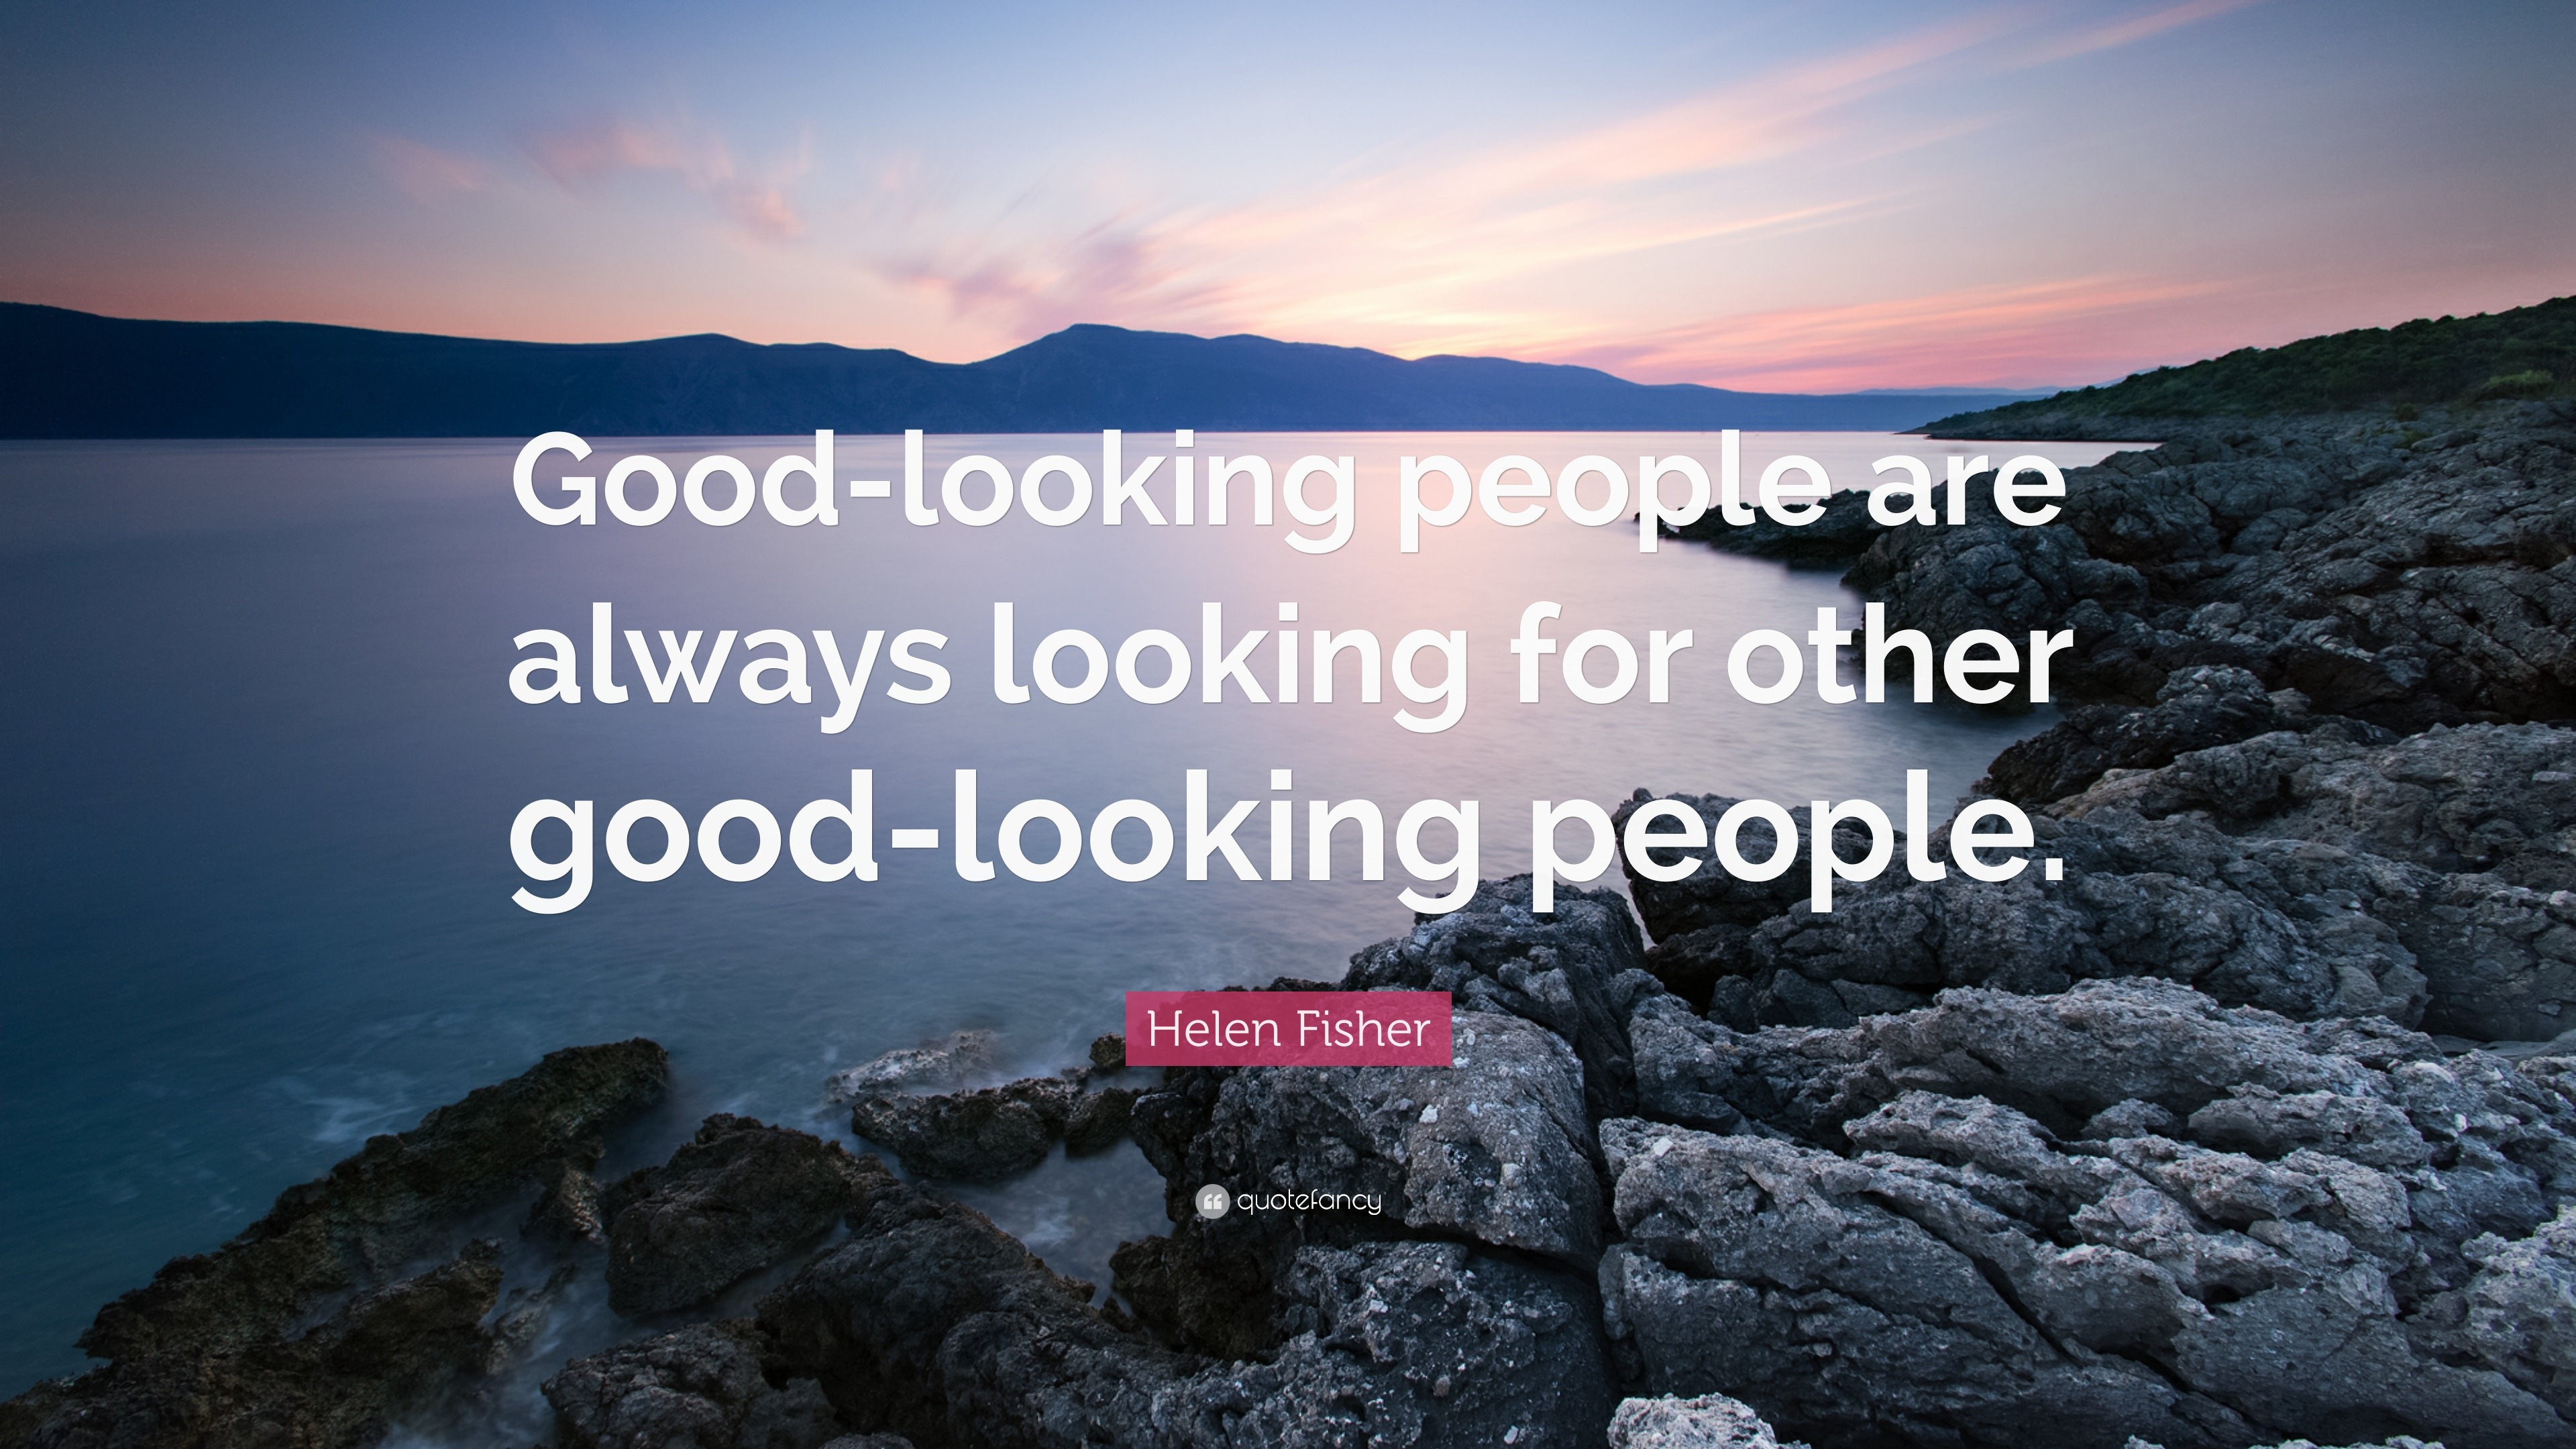 Helen Fisher quote: Good-looking people are always looking for other good- looking people.